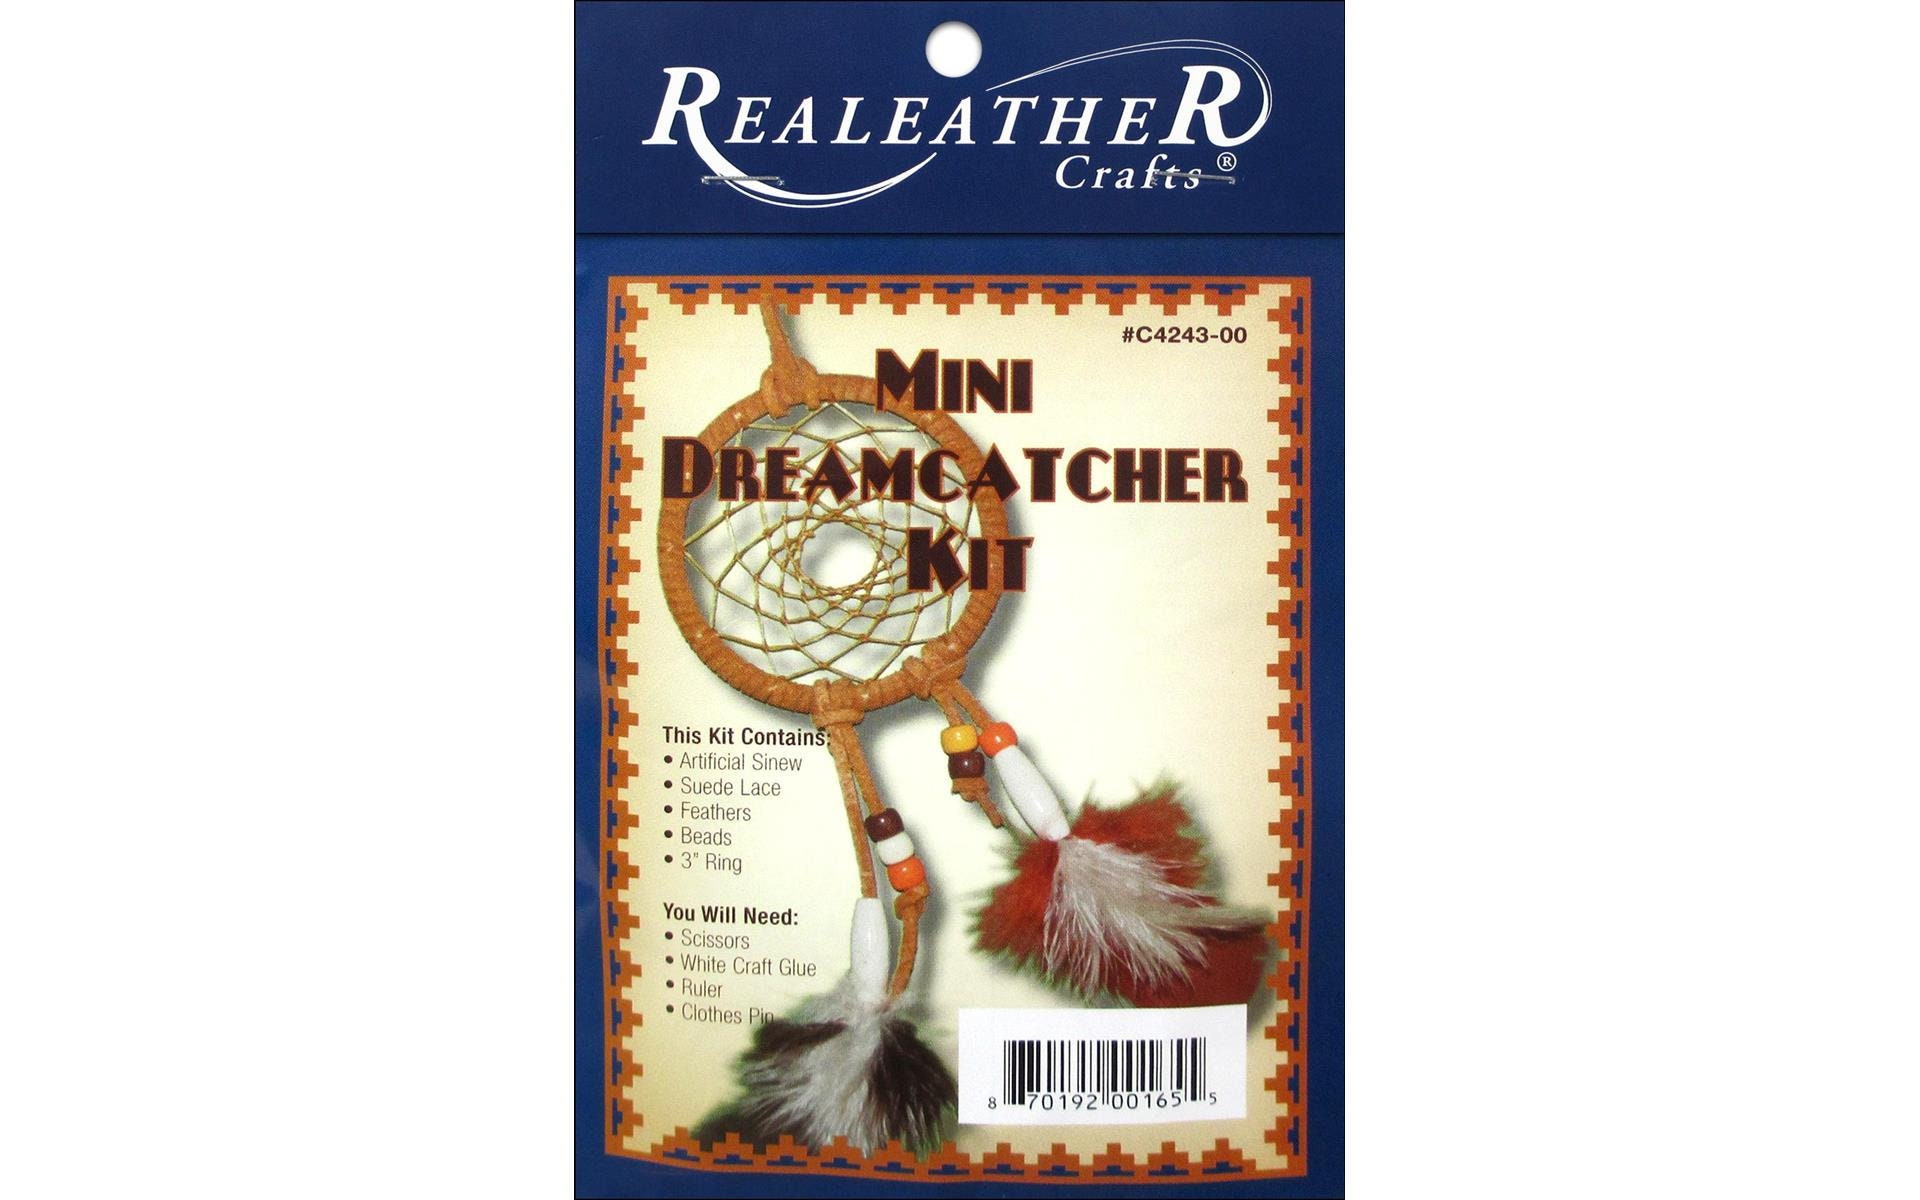  Realeather Basic Leather Craft Starter Kit - Basic Tools and  Leather to Make a Key Fob, Bag Tag, Wristband, Cell Phone and Card Sleeve